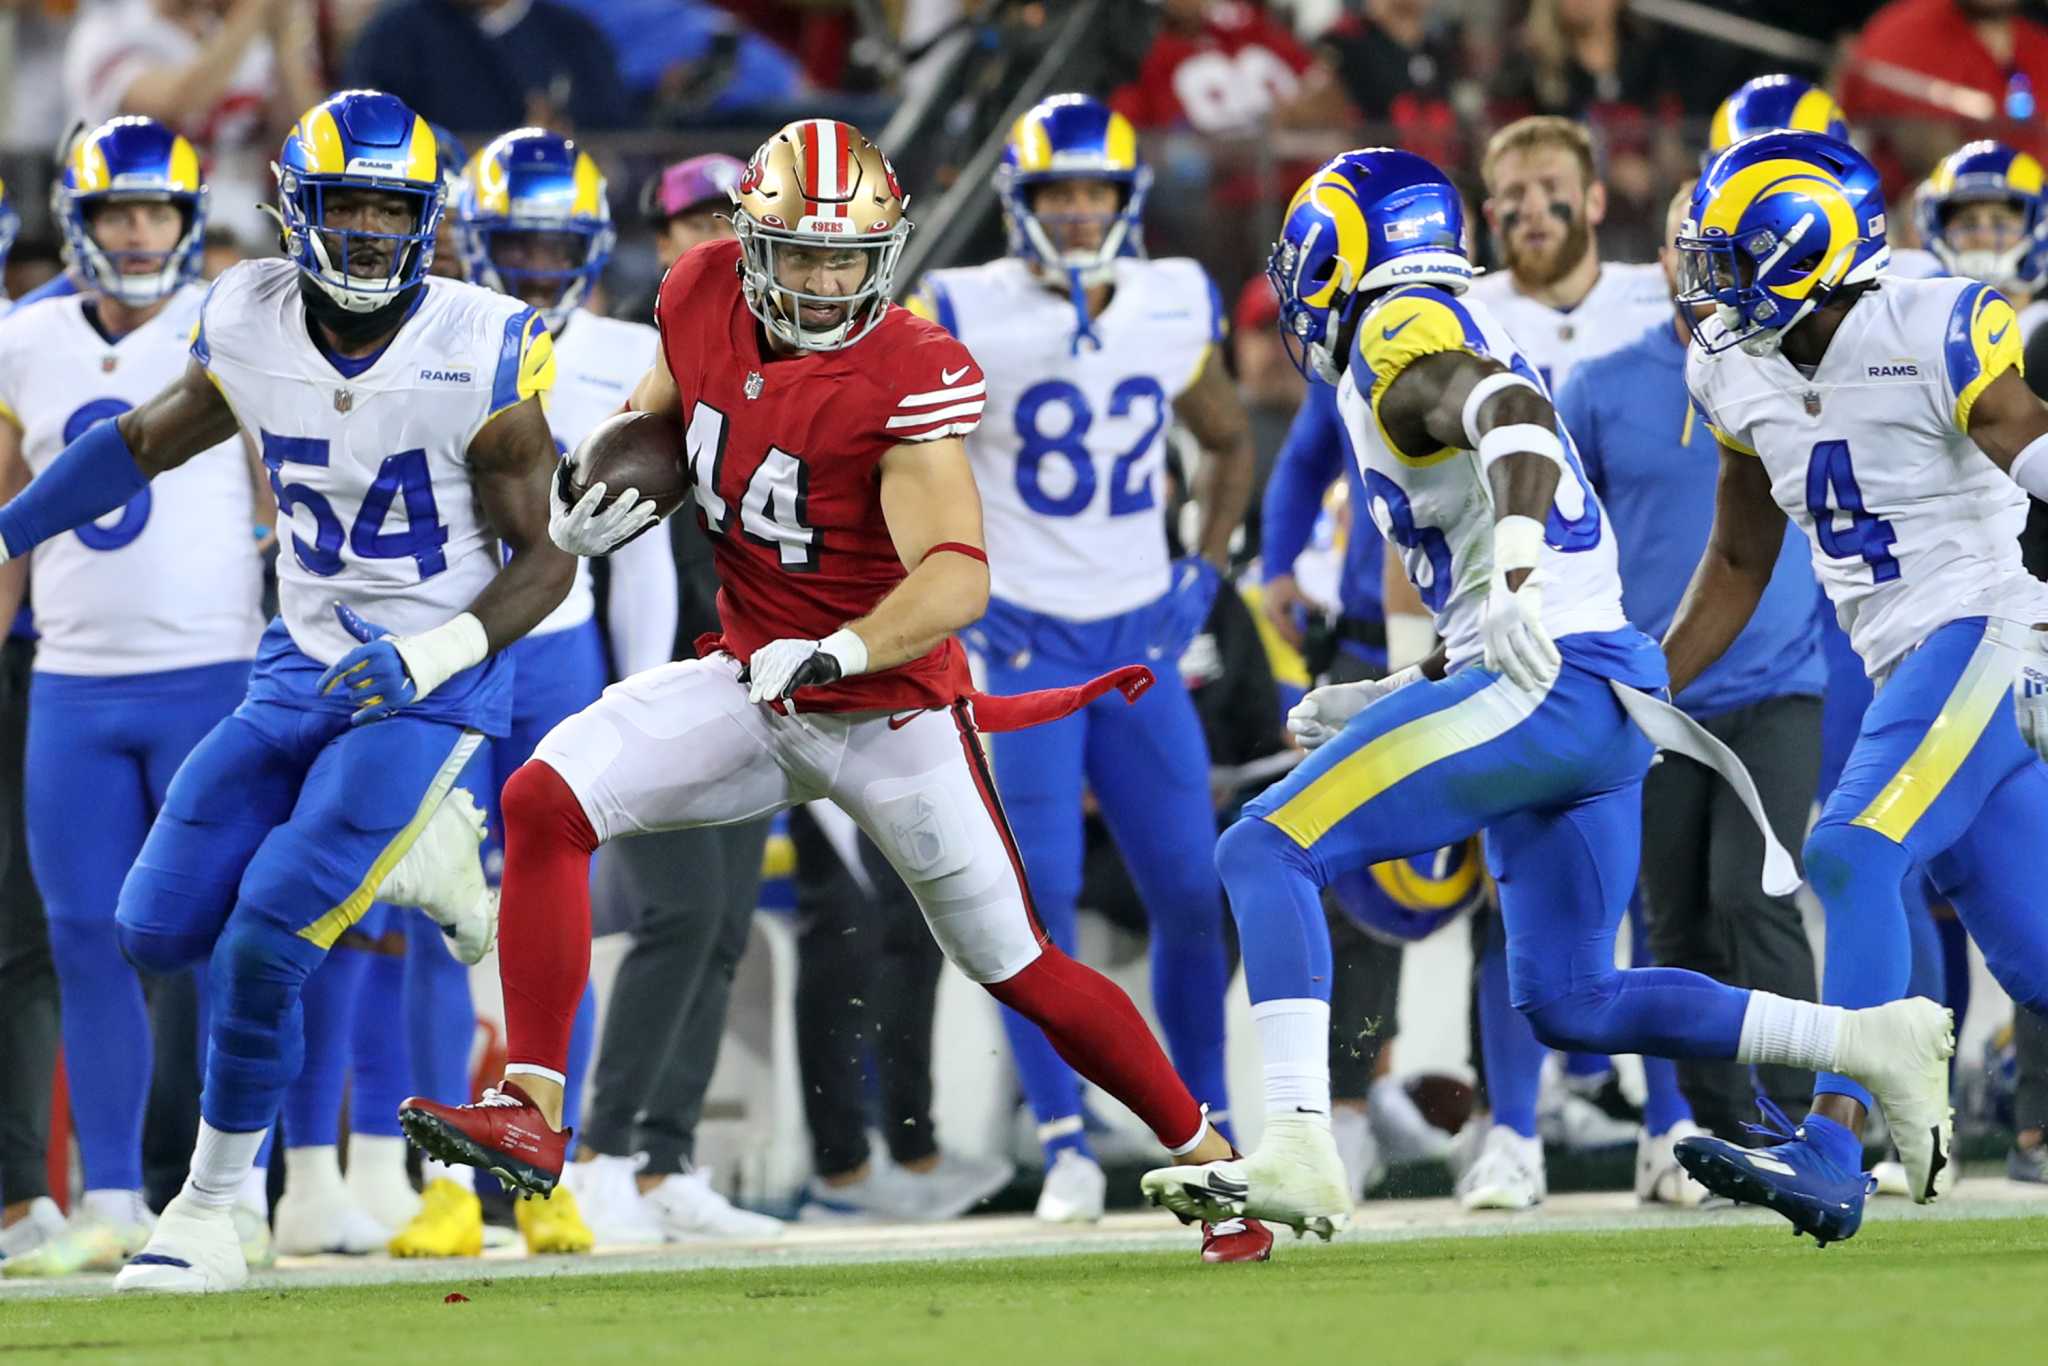 49ers vs. Rams NFC Championship Game: Round 3, for a trip to the Super Bowl  - Niners Nation